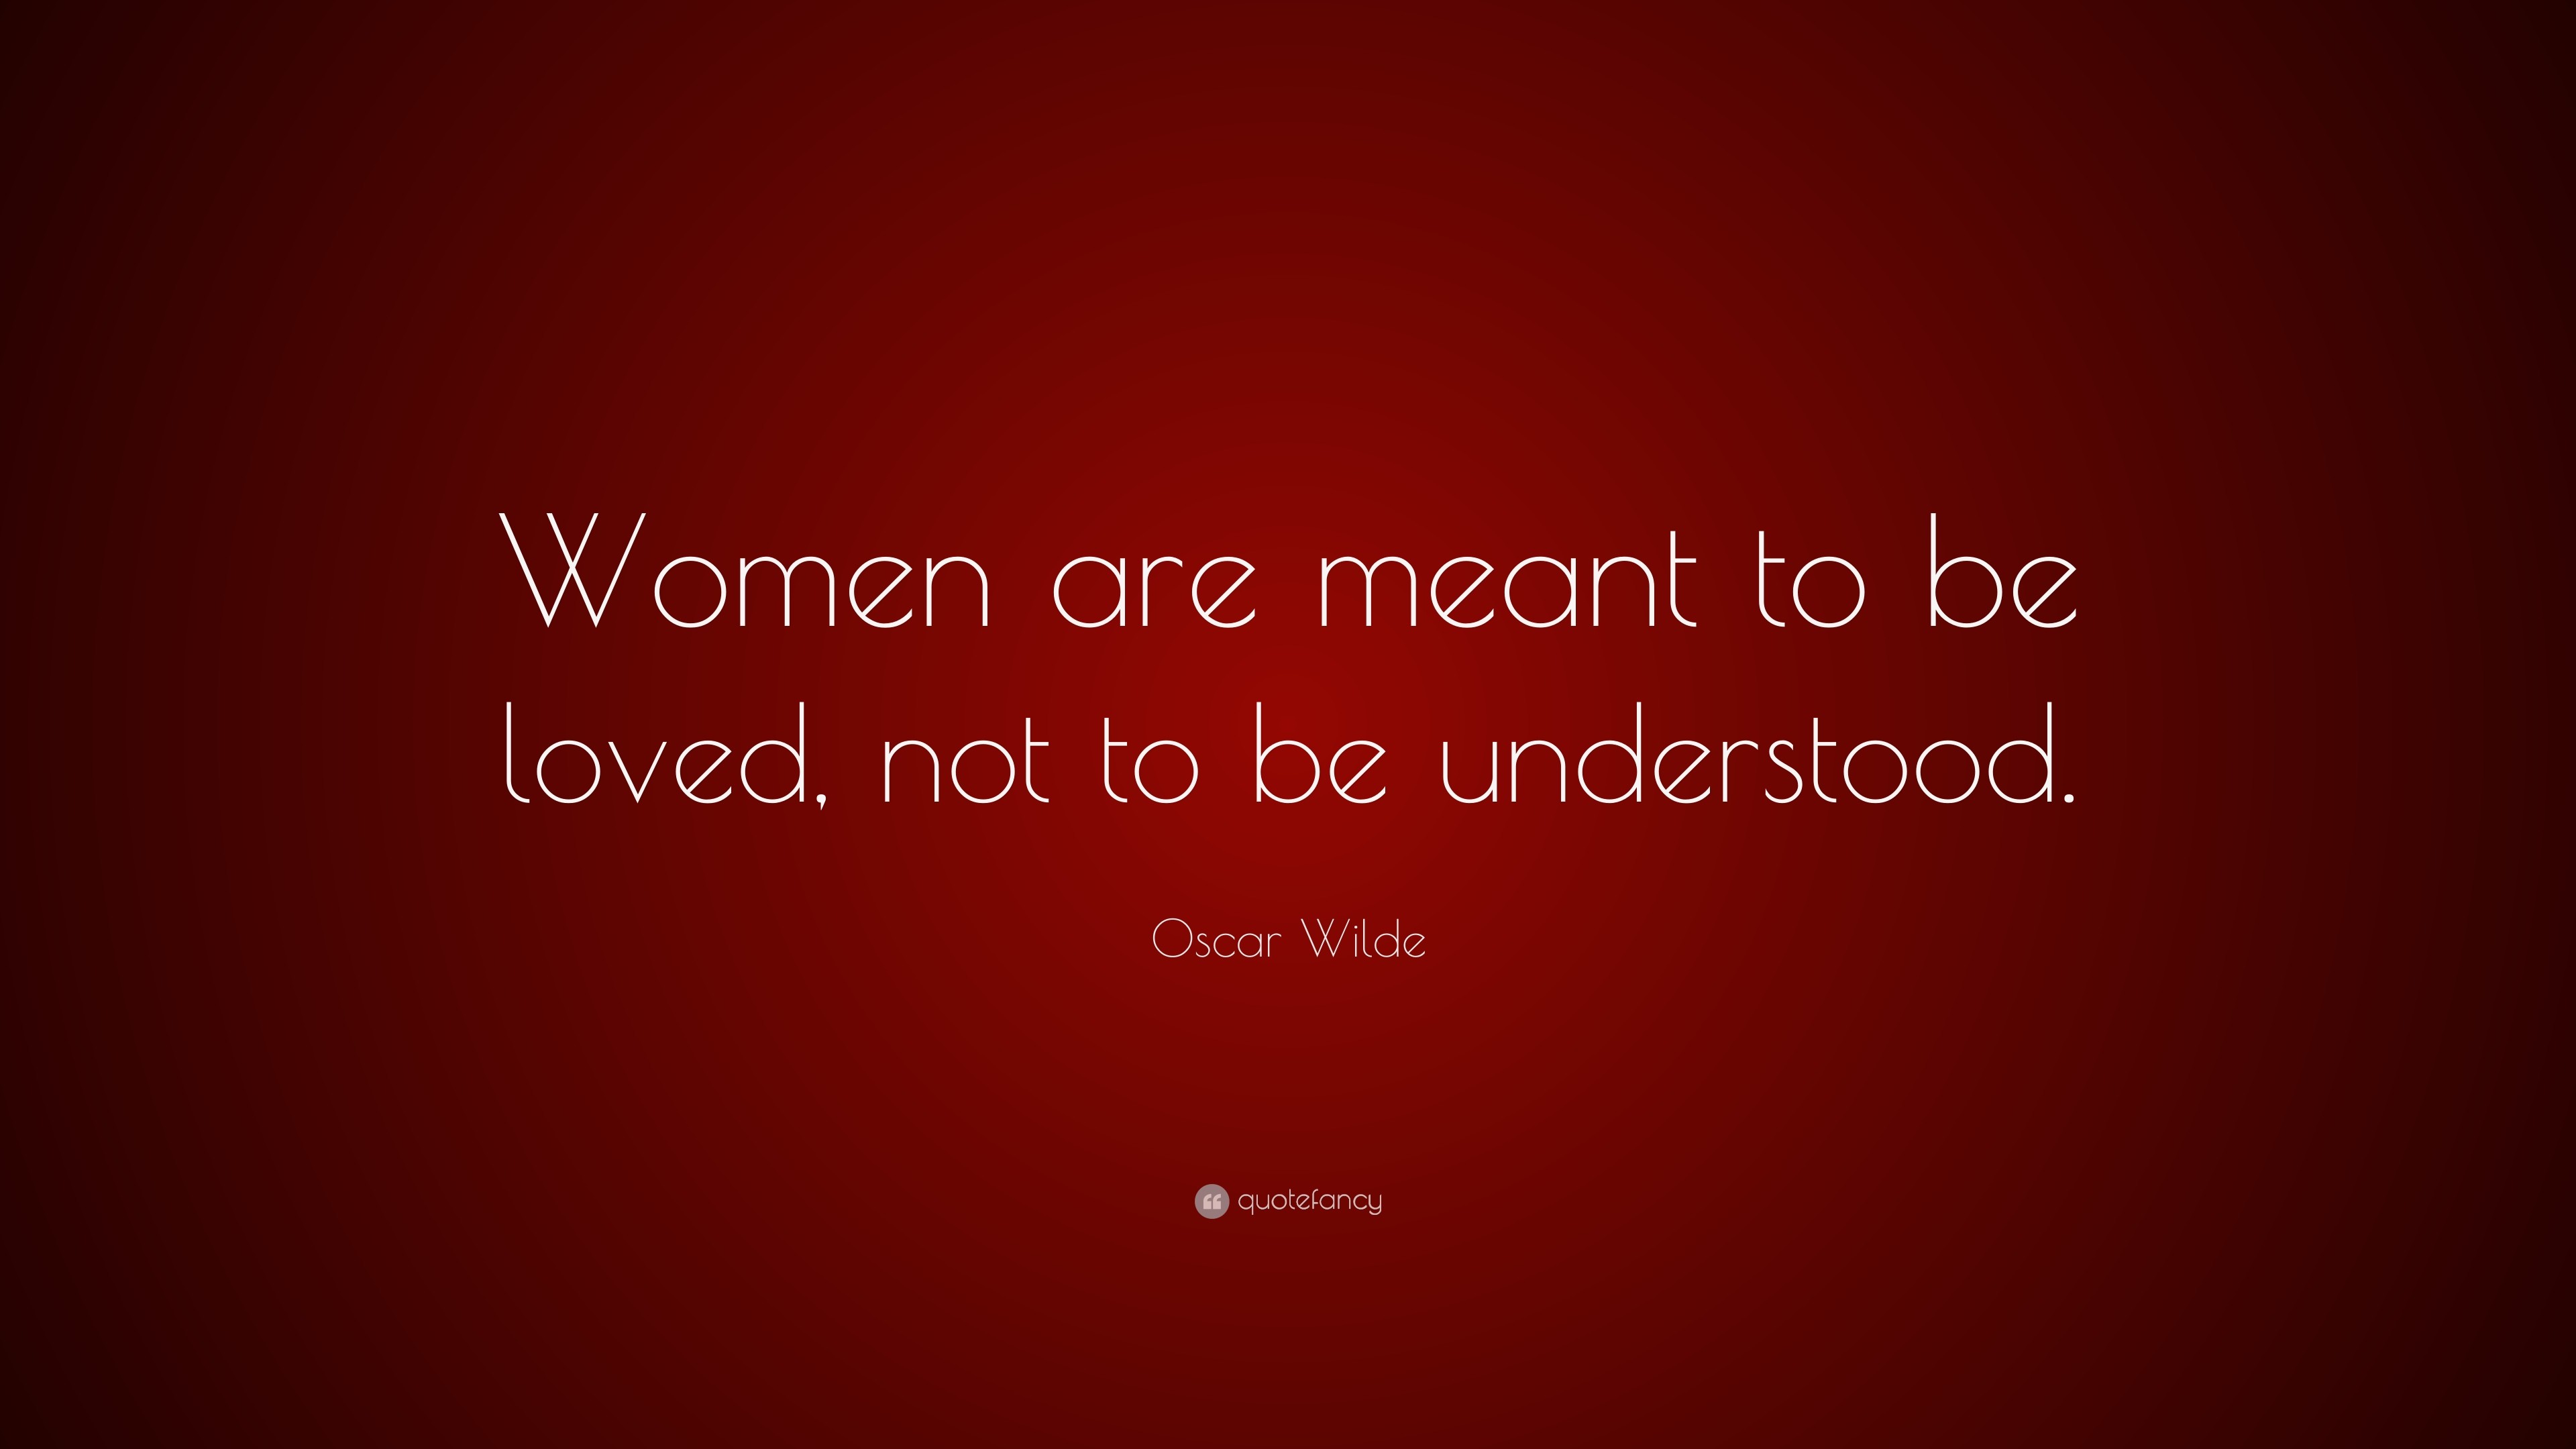 General 3840x2160 Oscar Wilde quote text inspirational motivational red simple background red background women